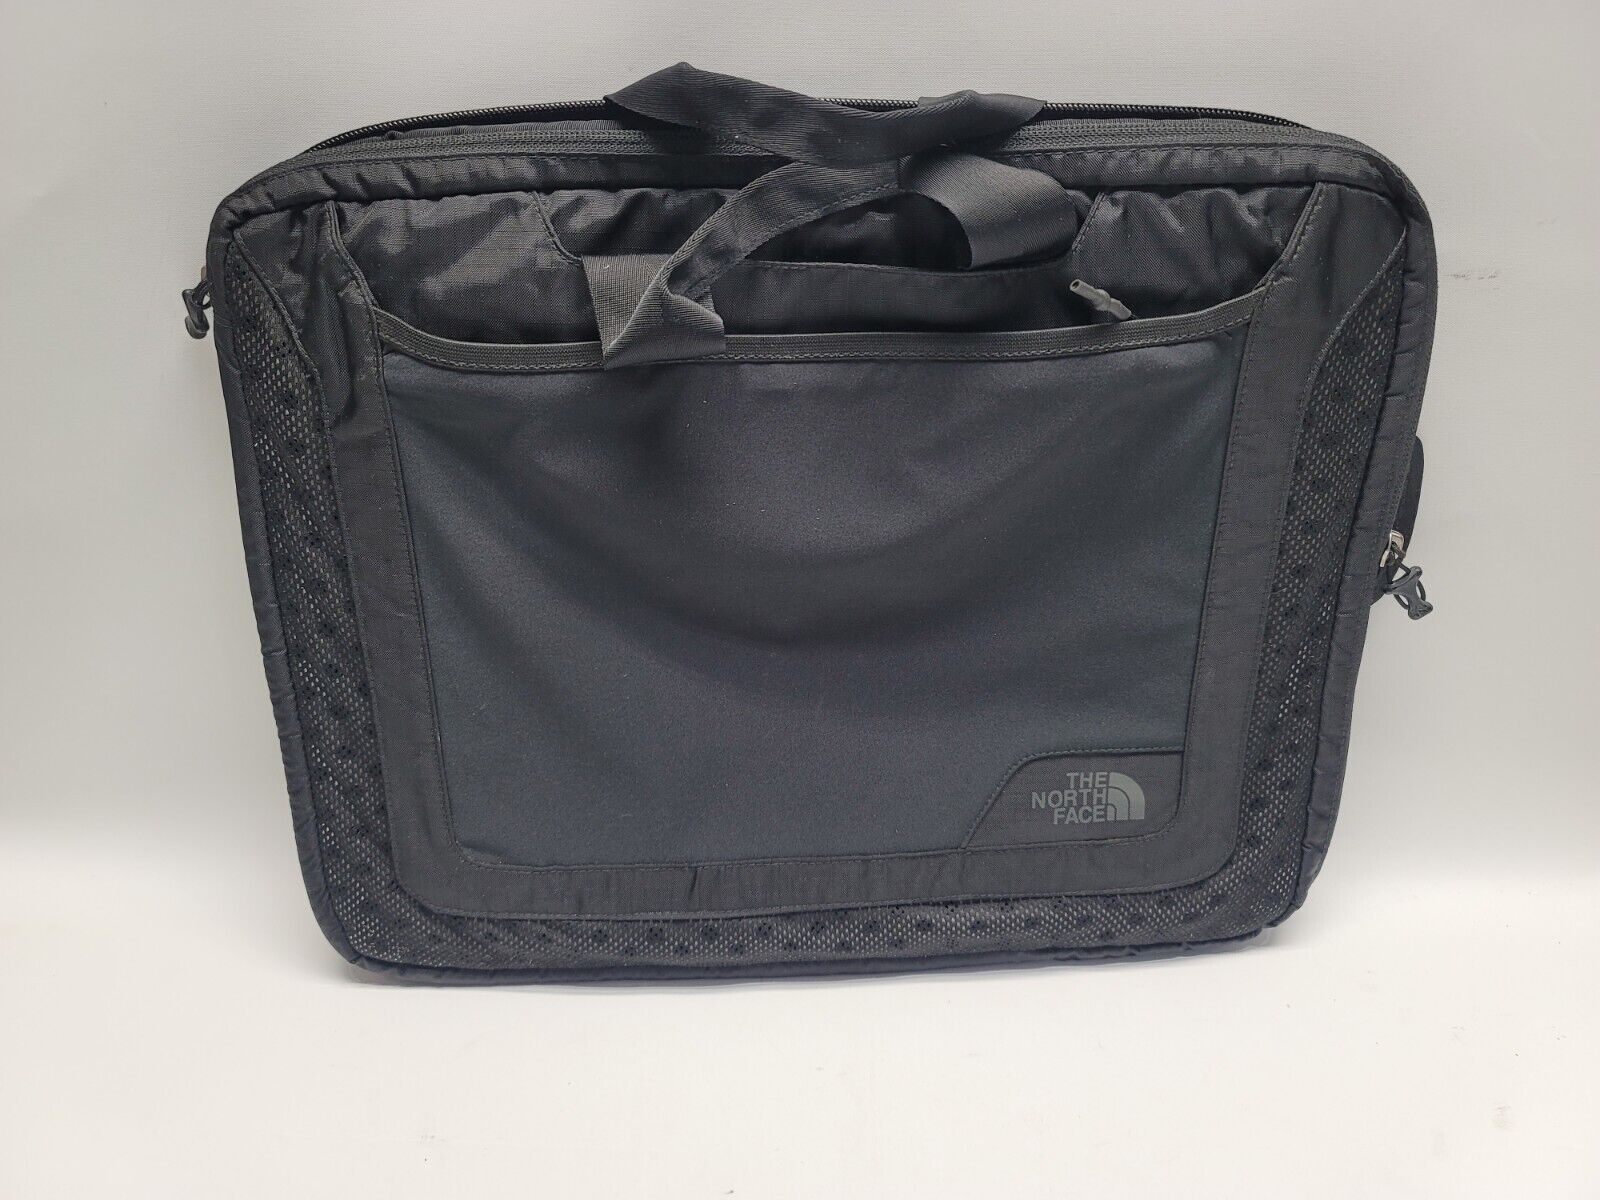 The North Face Lightweight Laptop Sleeve Case Bag Briefcase Black 16x13 